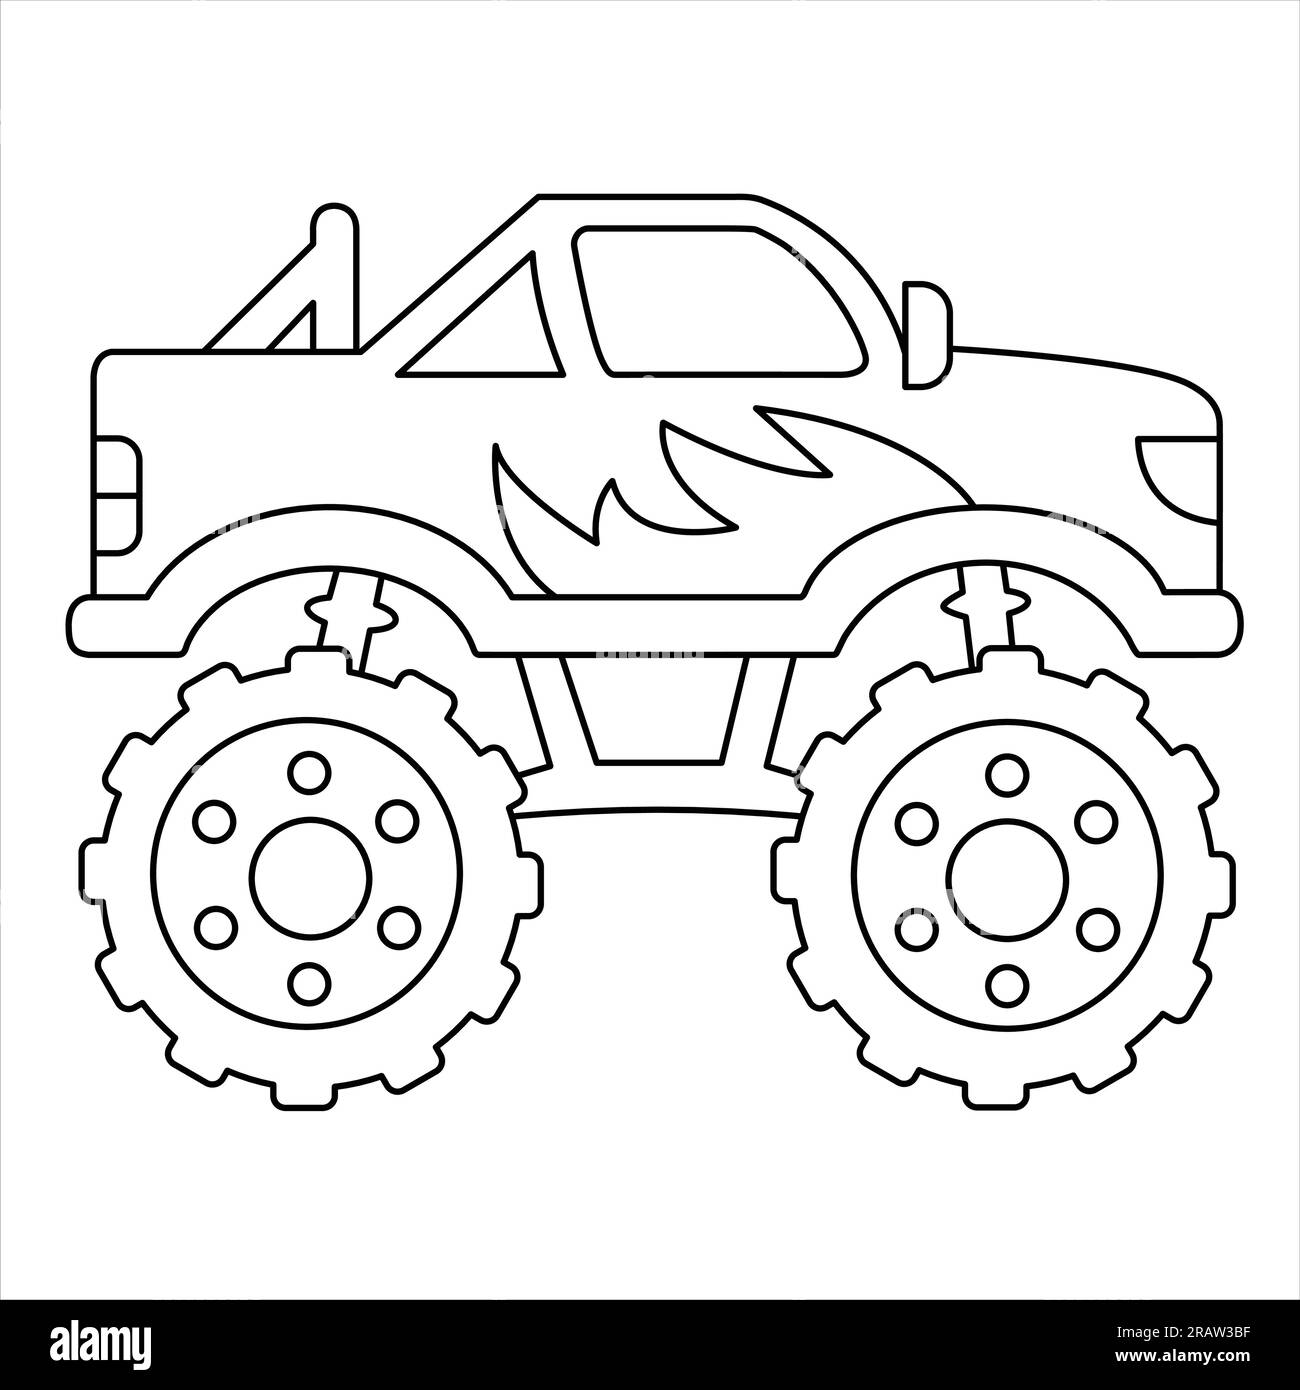 Monster truck Black and White Stock Photos & Images - Alamy